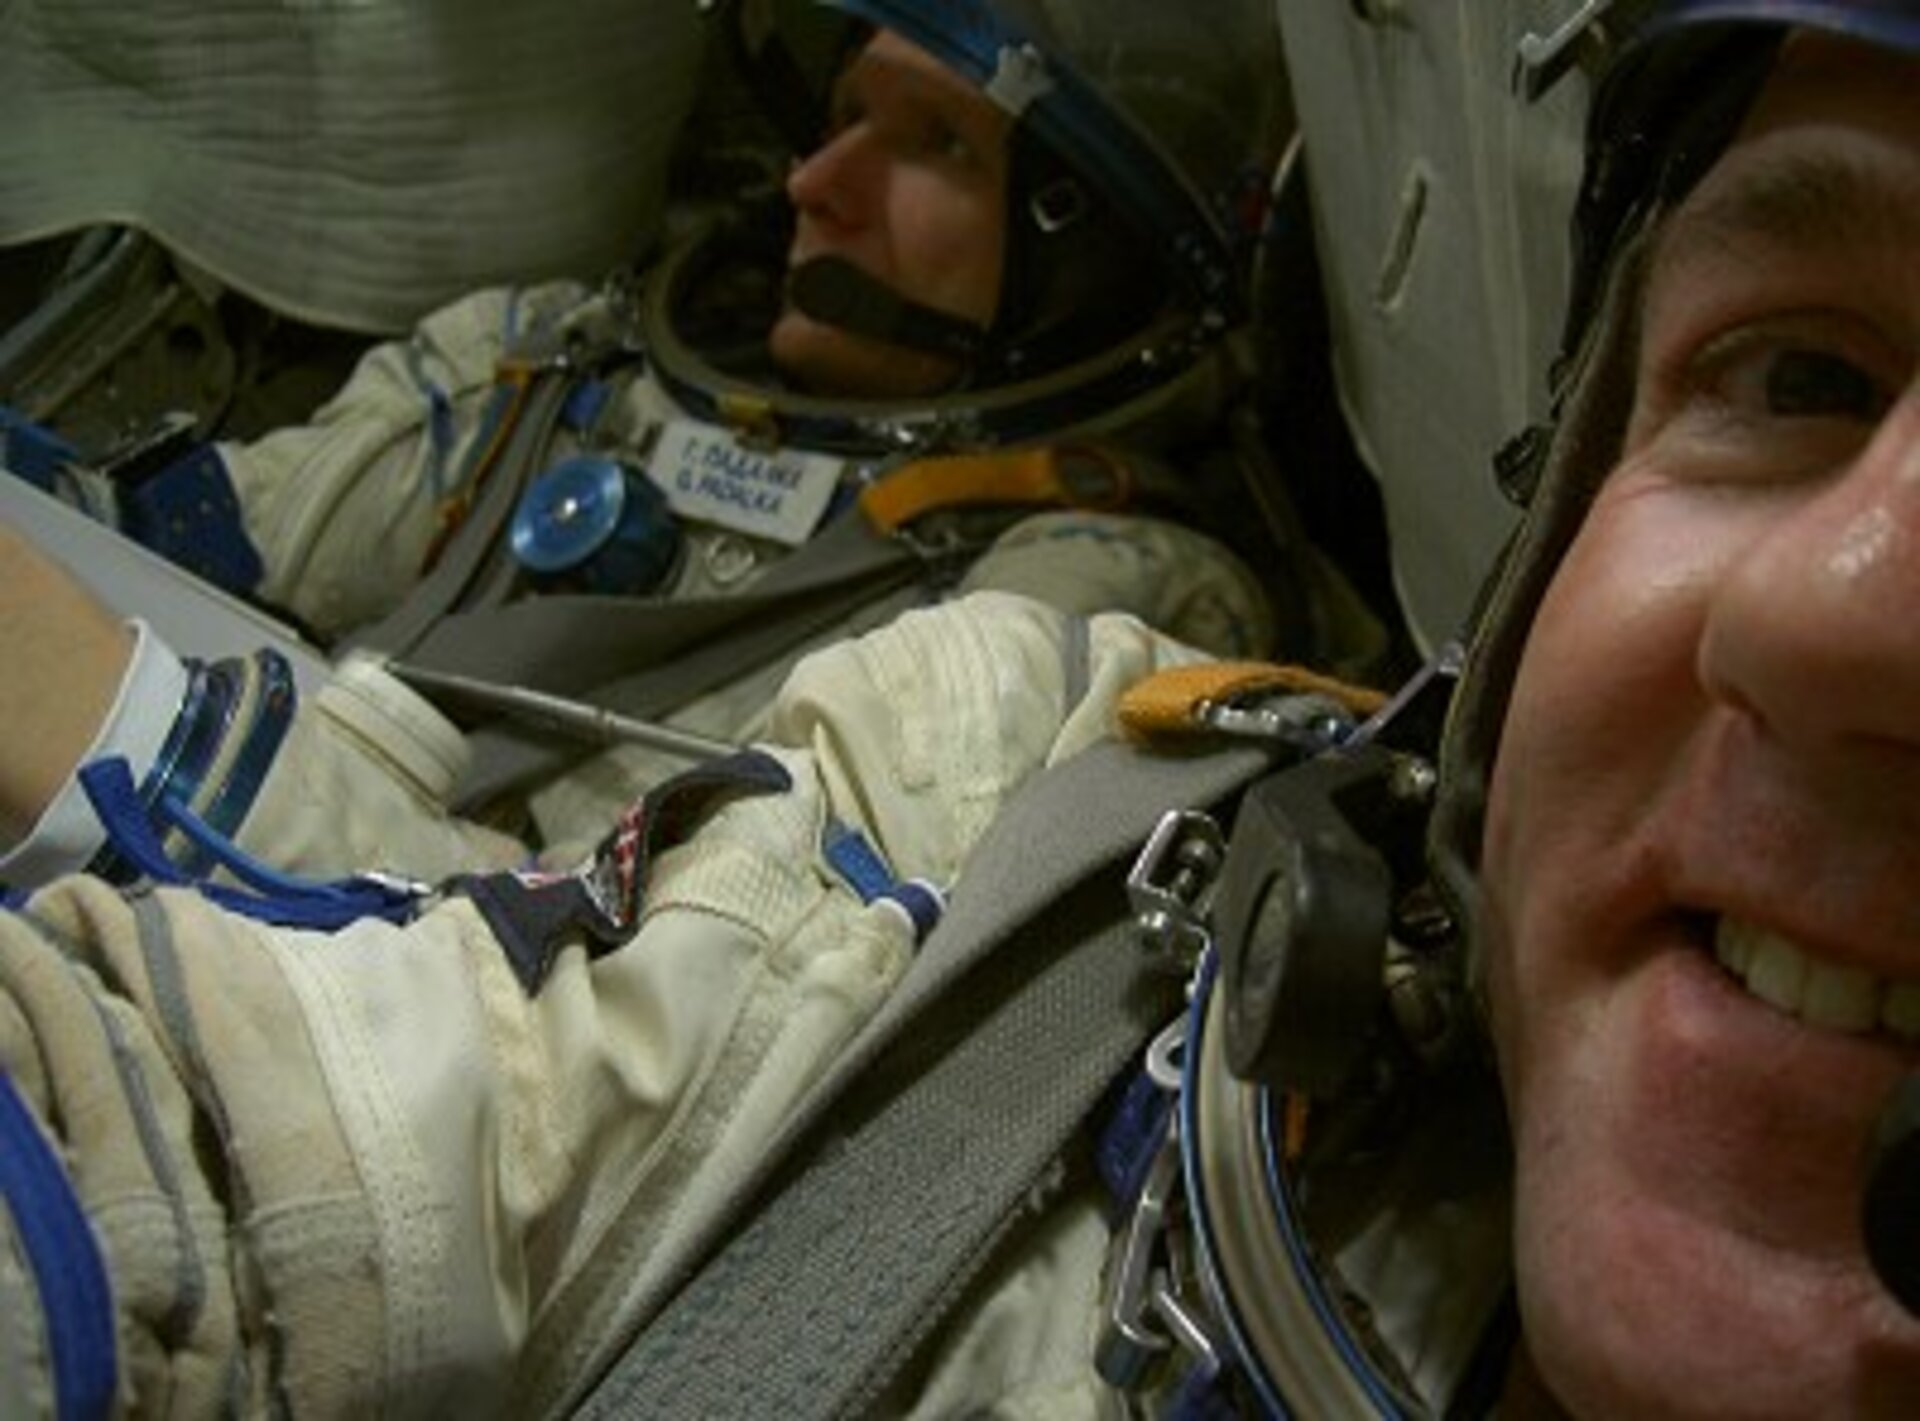 André Kuipers in the Soyuz simulator together with his commander Gennady Padalka